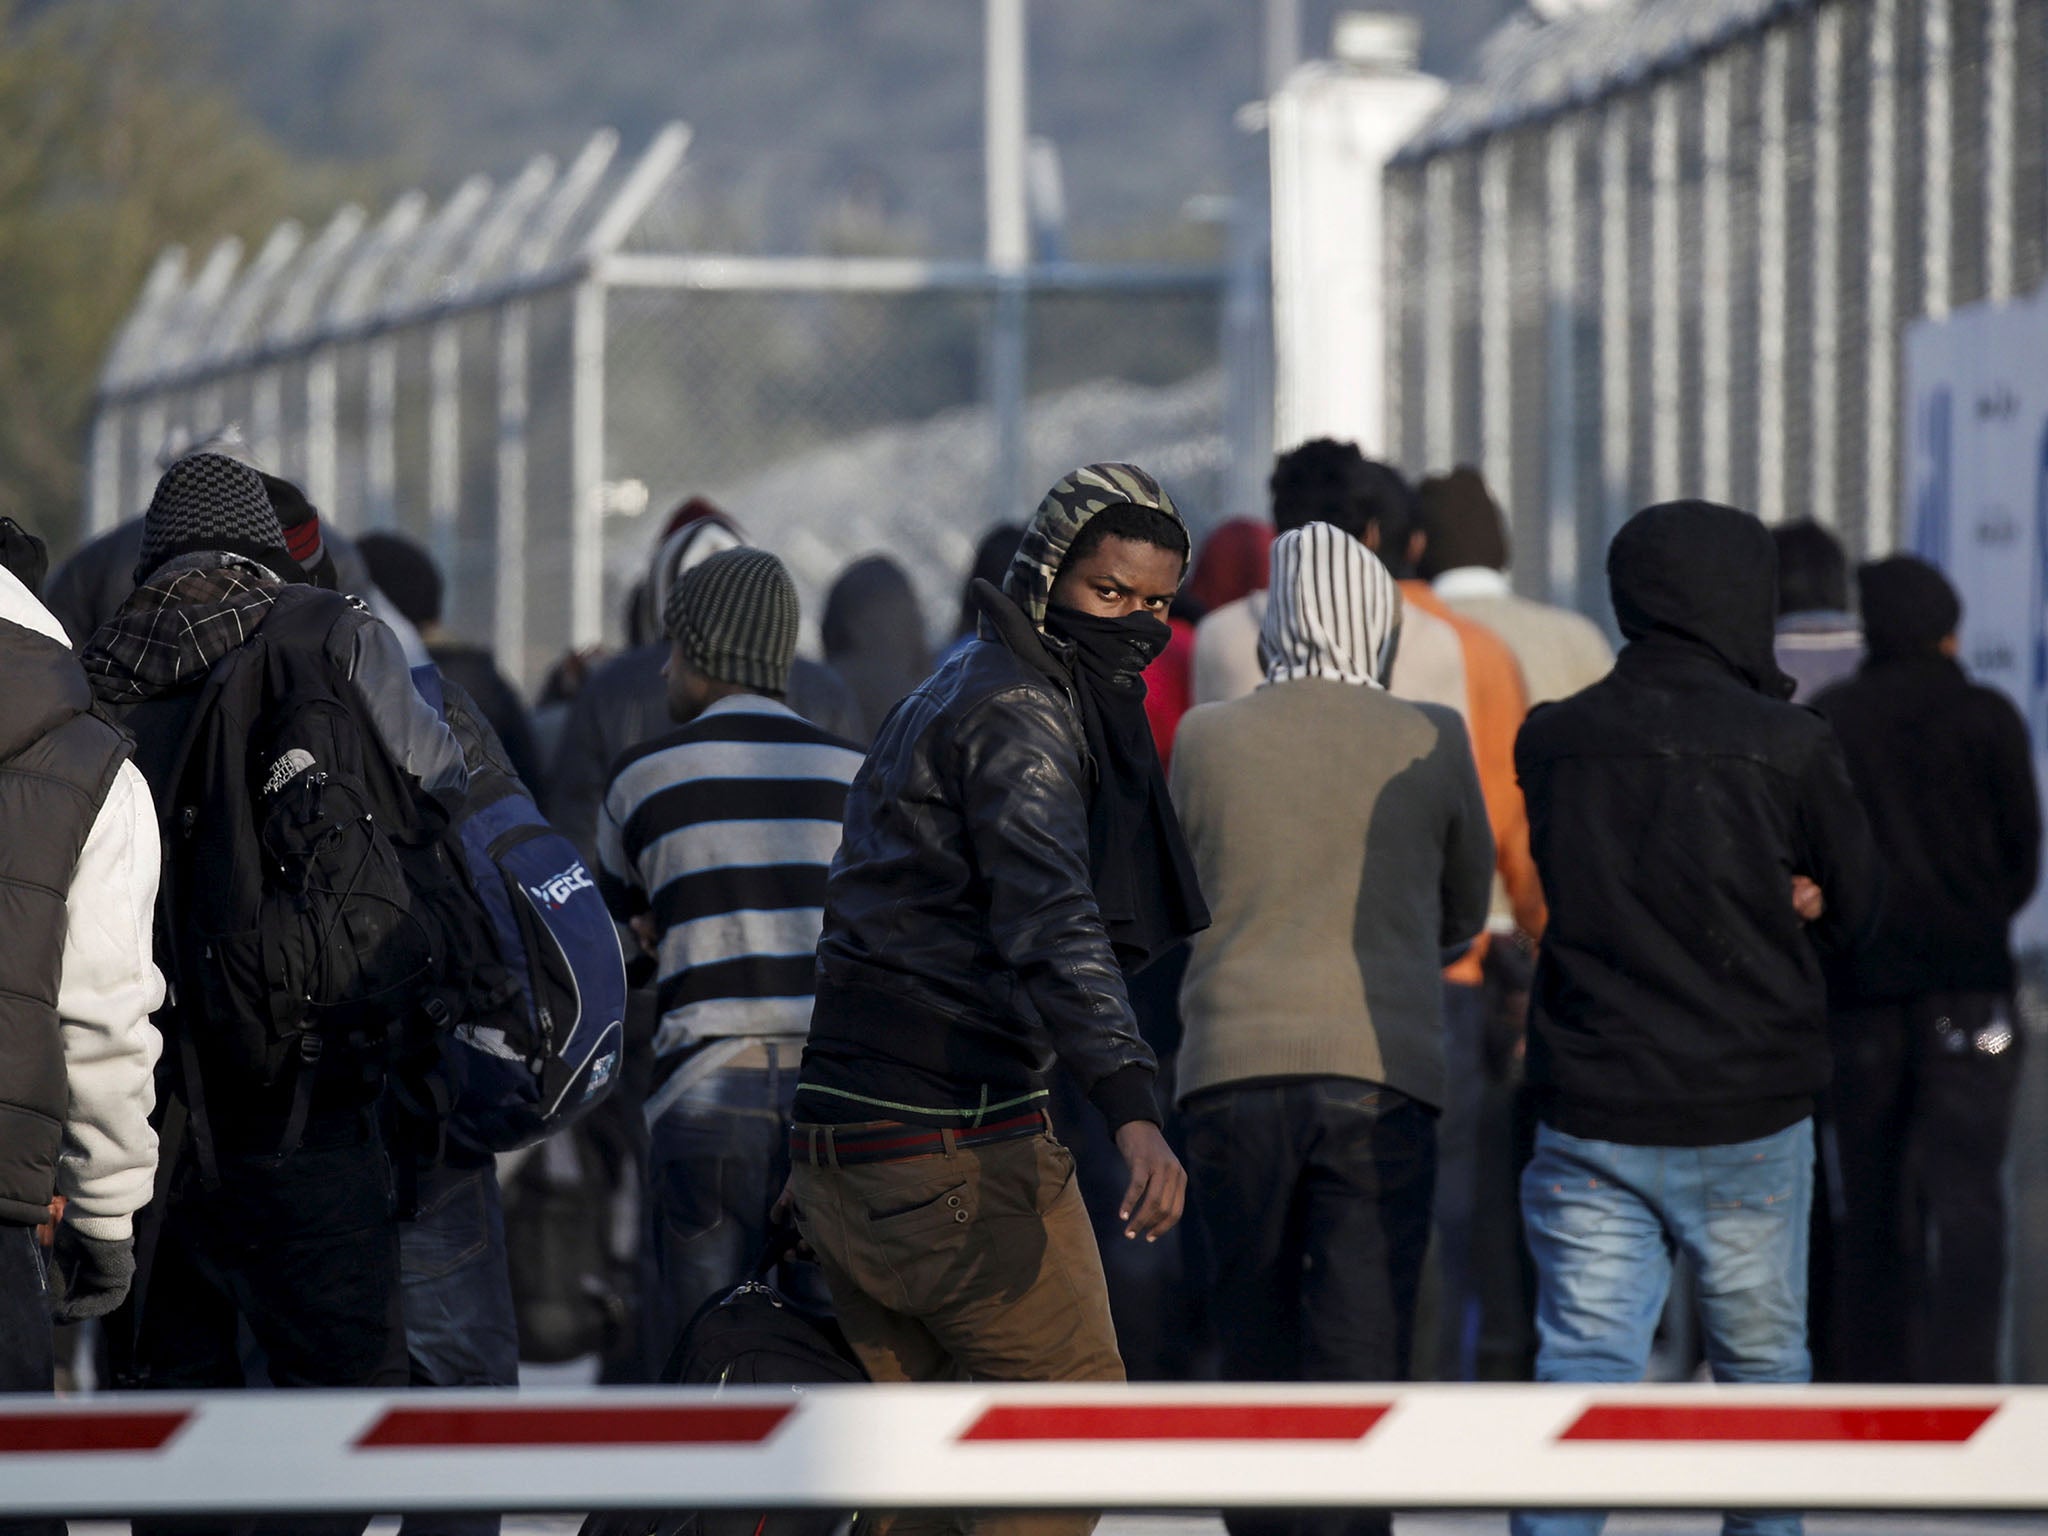 The grim winter conditions in overcrowded camps have been denounced as ‘deplorable’